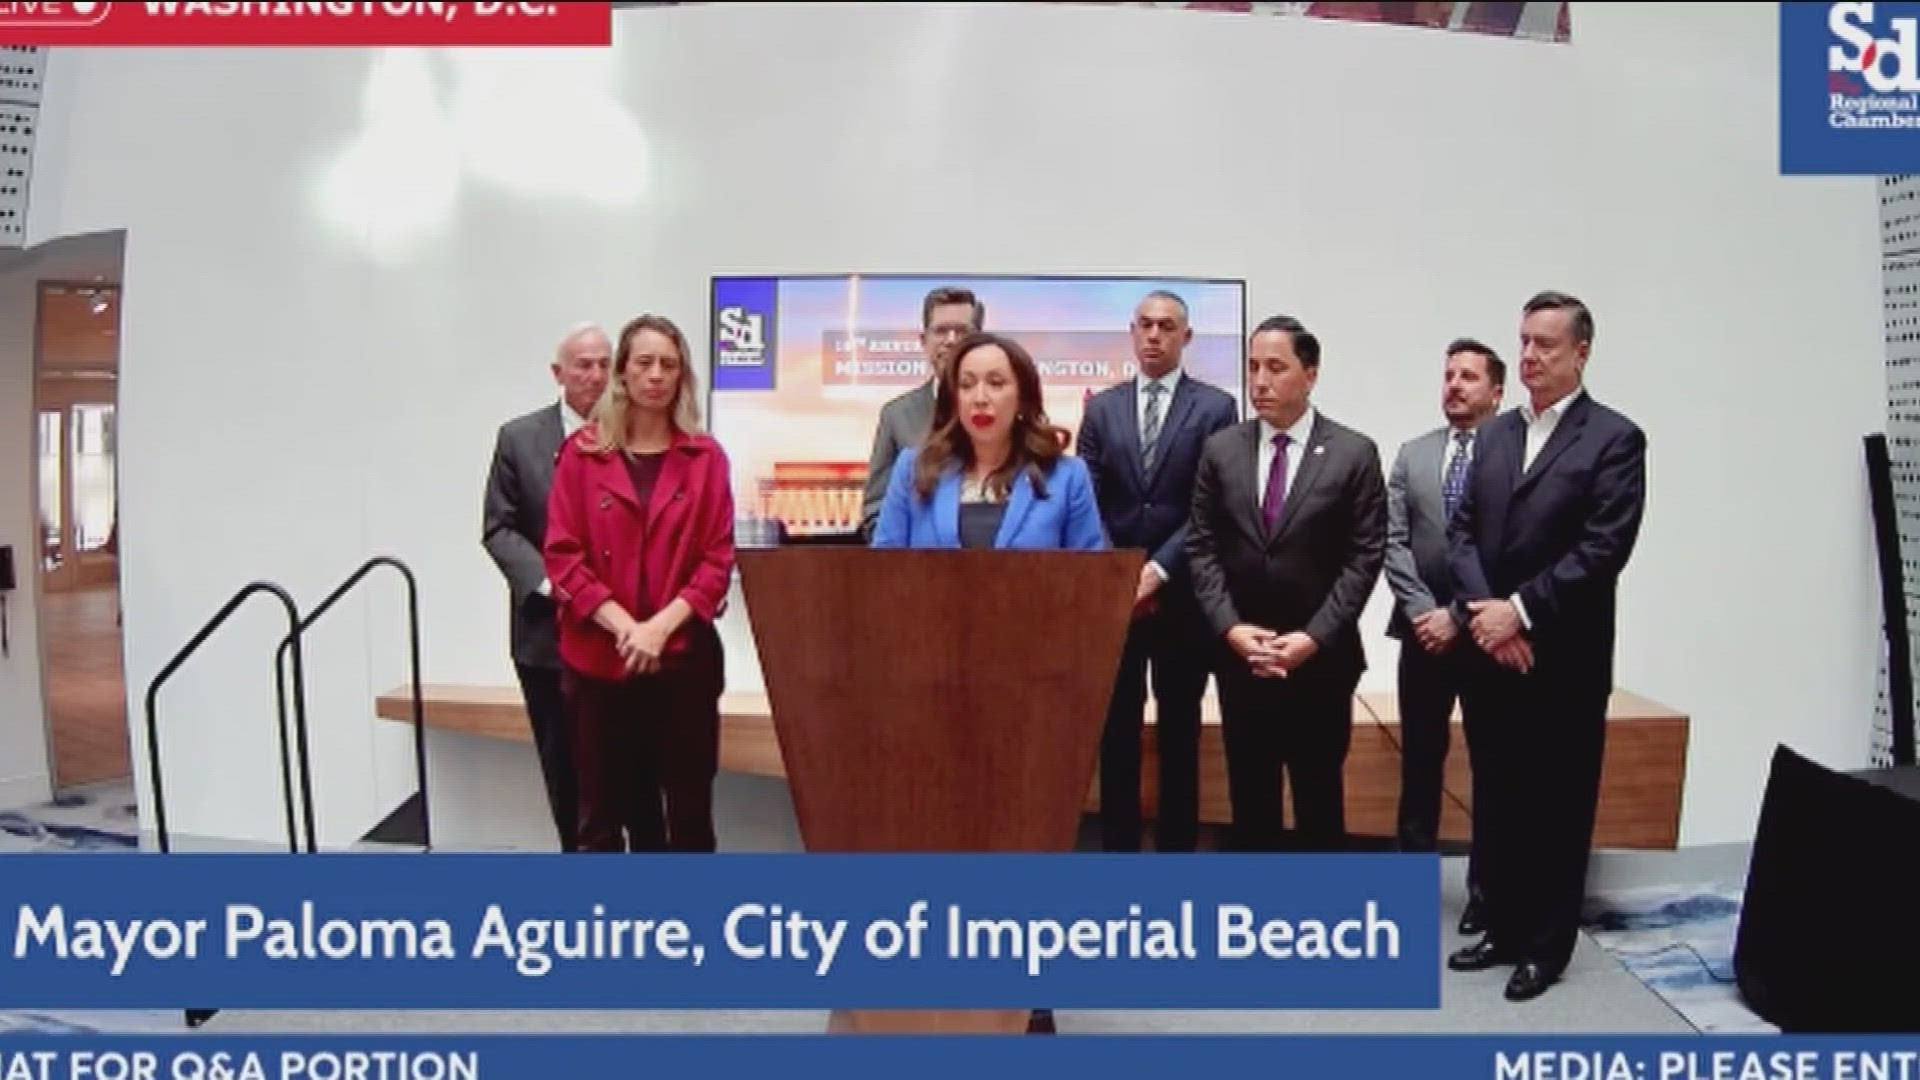 A binational delegation from the San Diego region held a news conference calling on the federal government to take action on the sewage crisis.